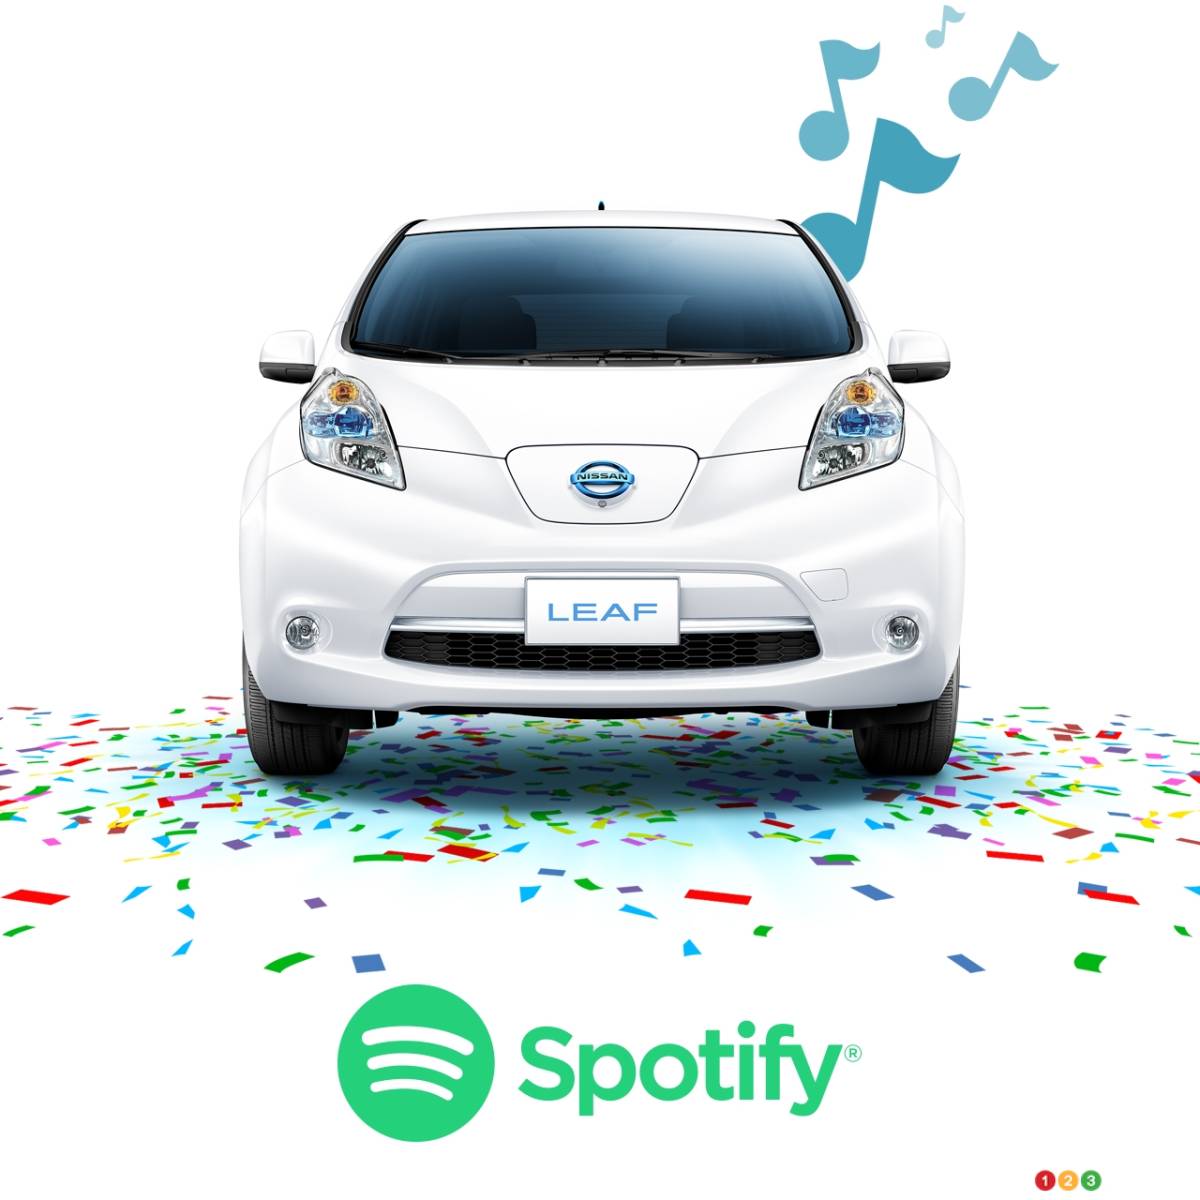 Nissan LEAF celebrates 5th anniversary with music